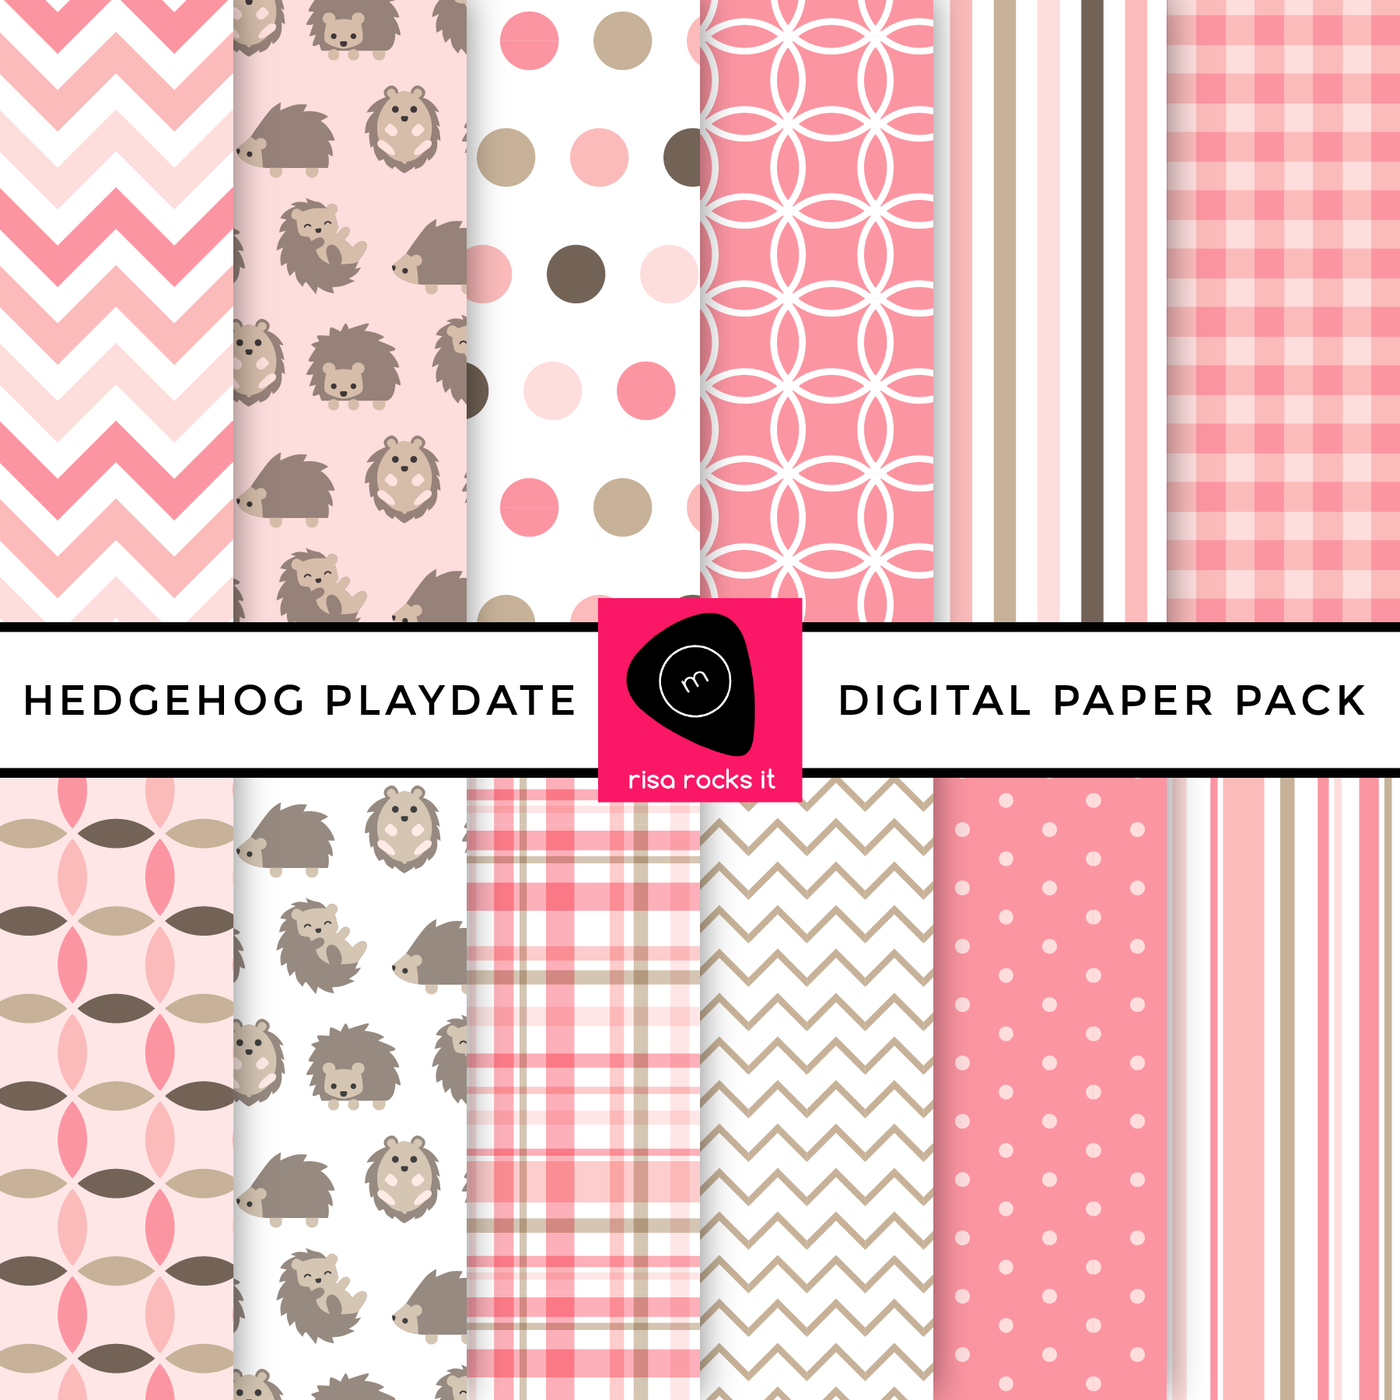 Hedgehog playdate digital paper pack by Risa Rocks It. A collection of 12 paper patterns in shades of pink, tan, and grey-brown.